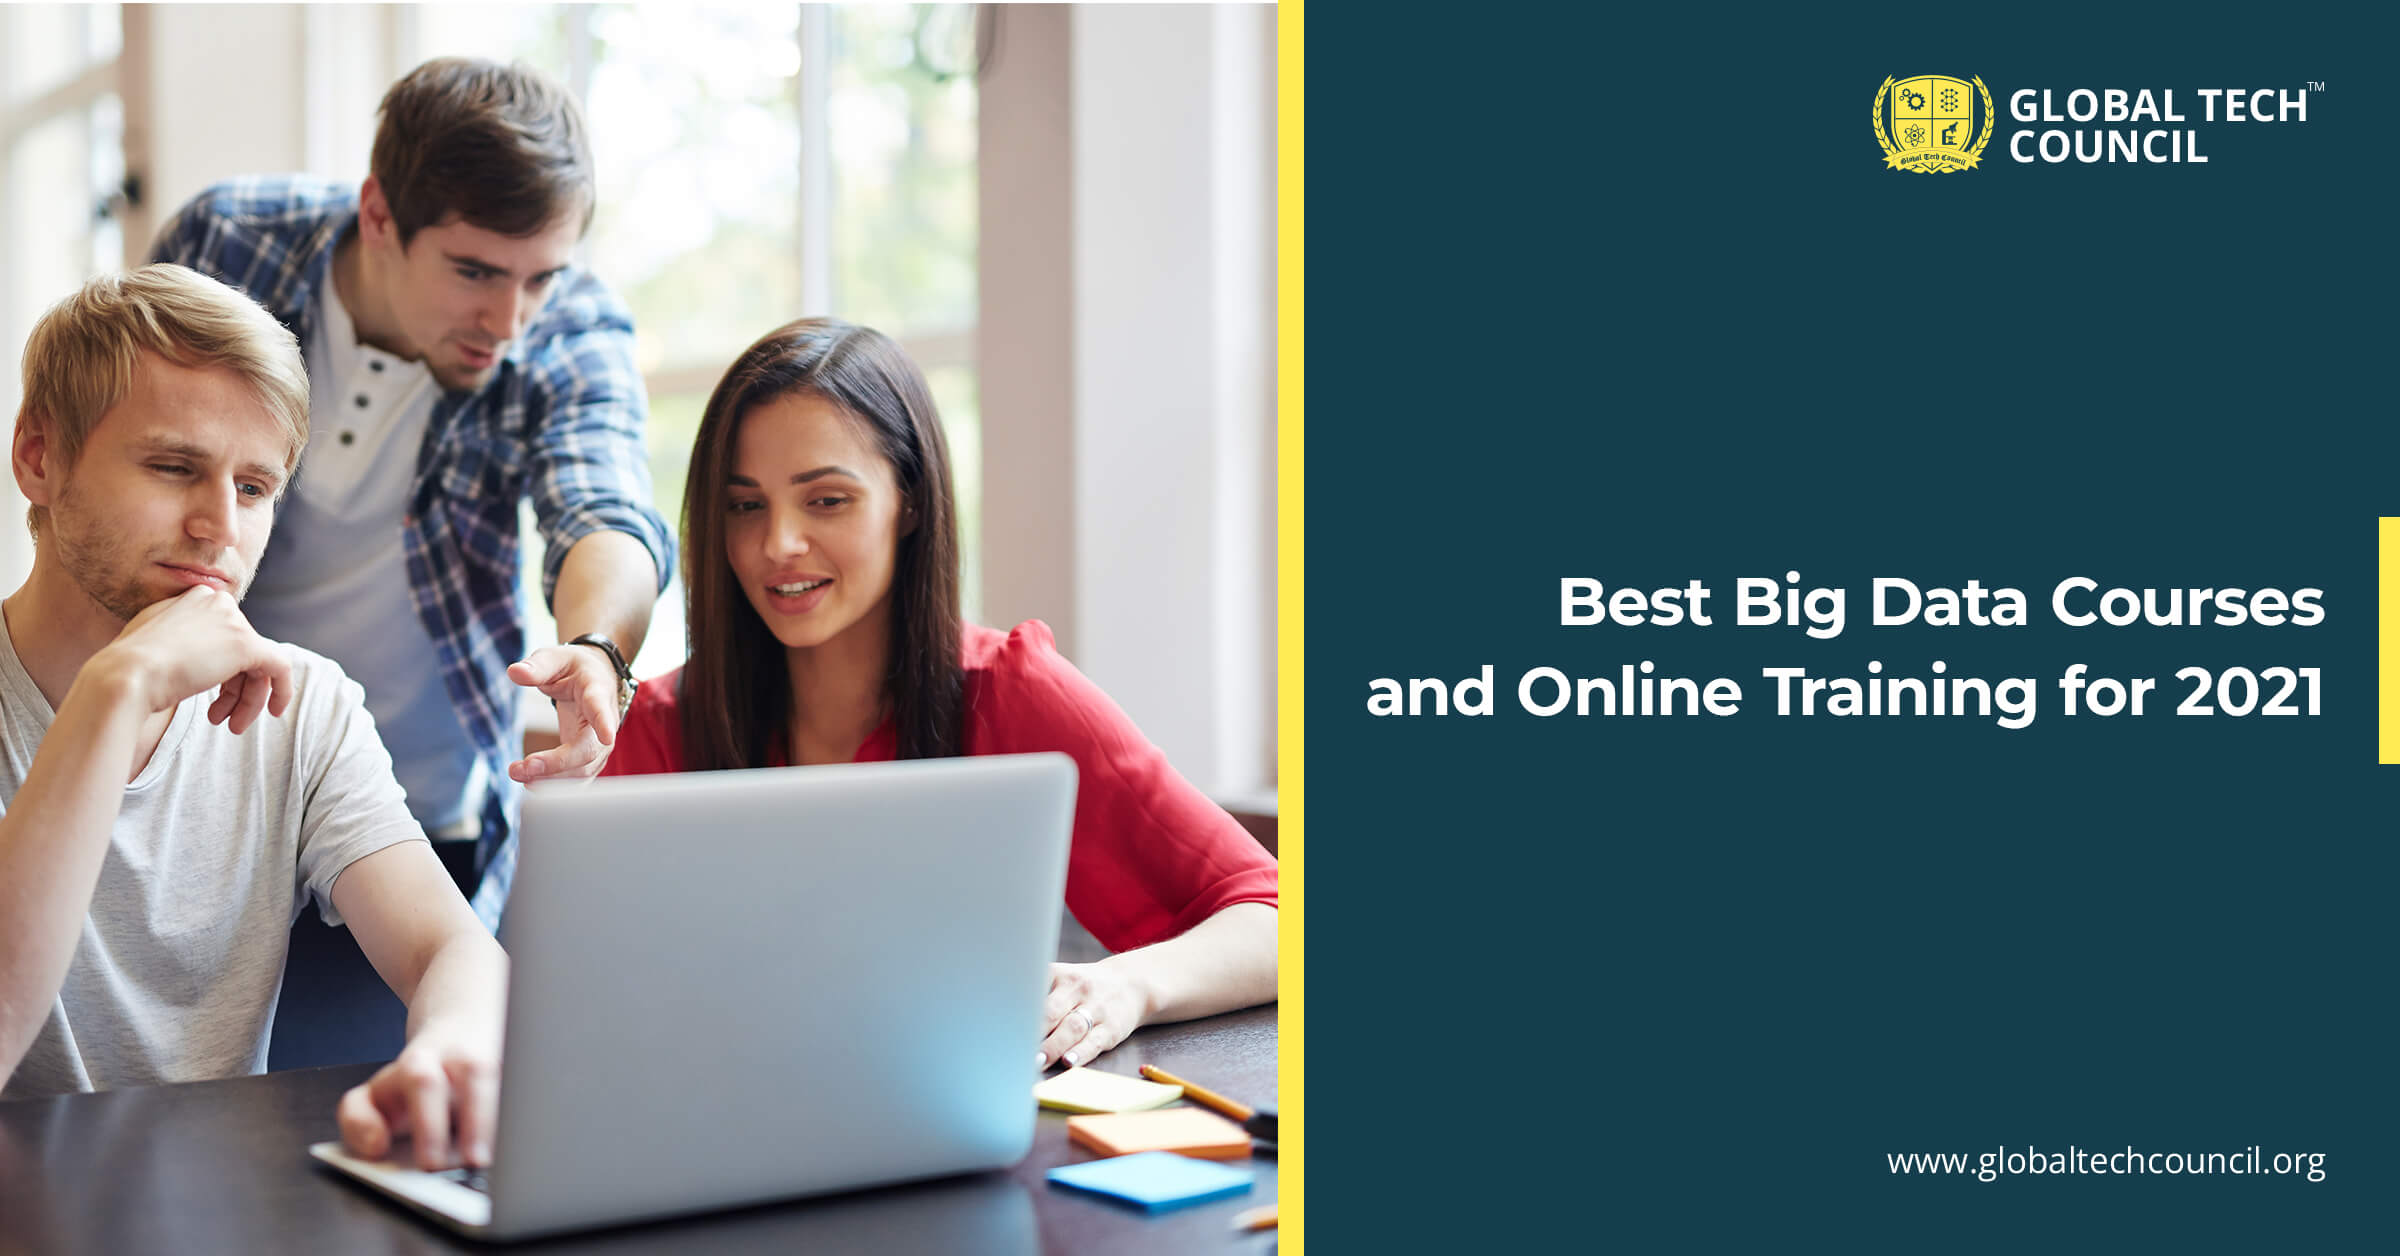 Best Big Data Courses and Online Training for 2021